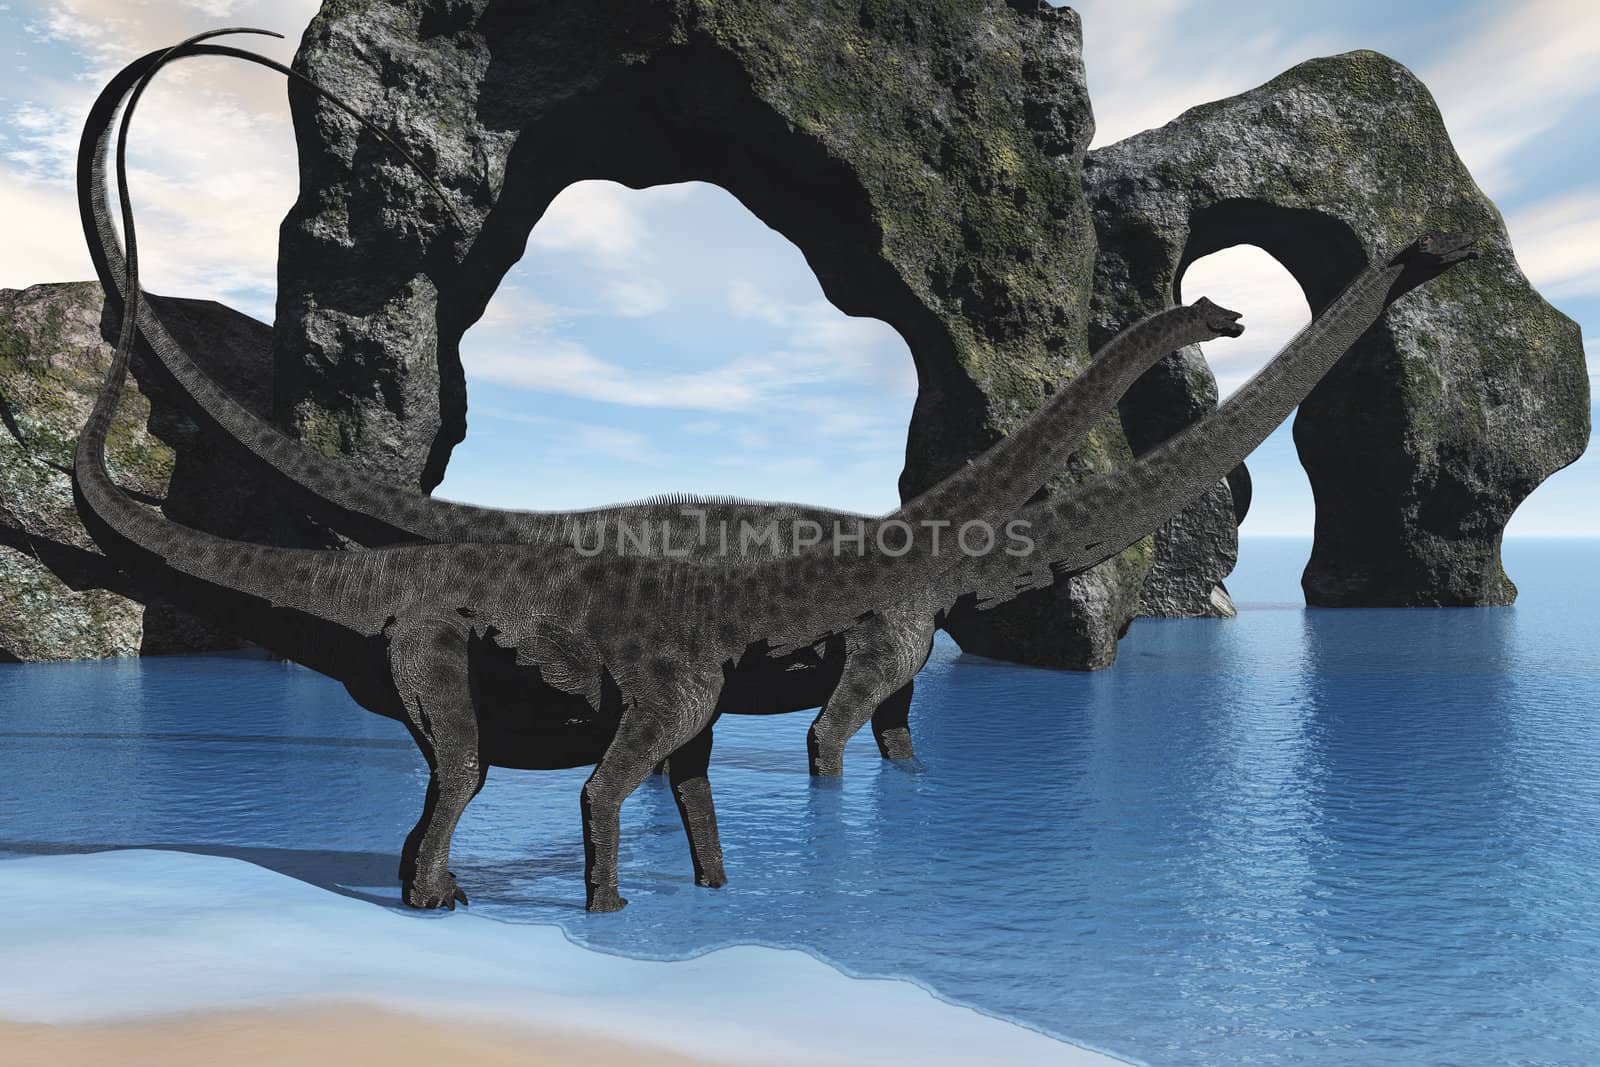 Two Diplodocus dinosaurs wade through shallow waters of a beautiful seashore.